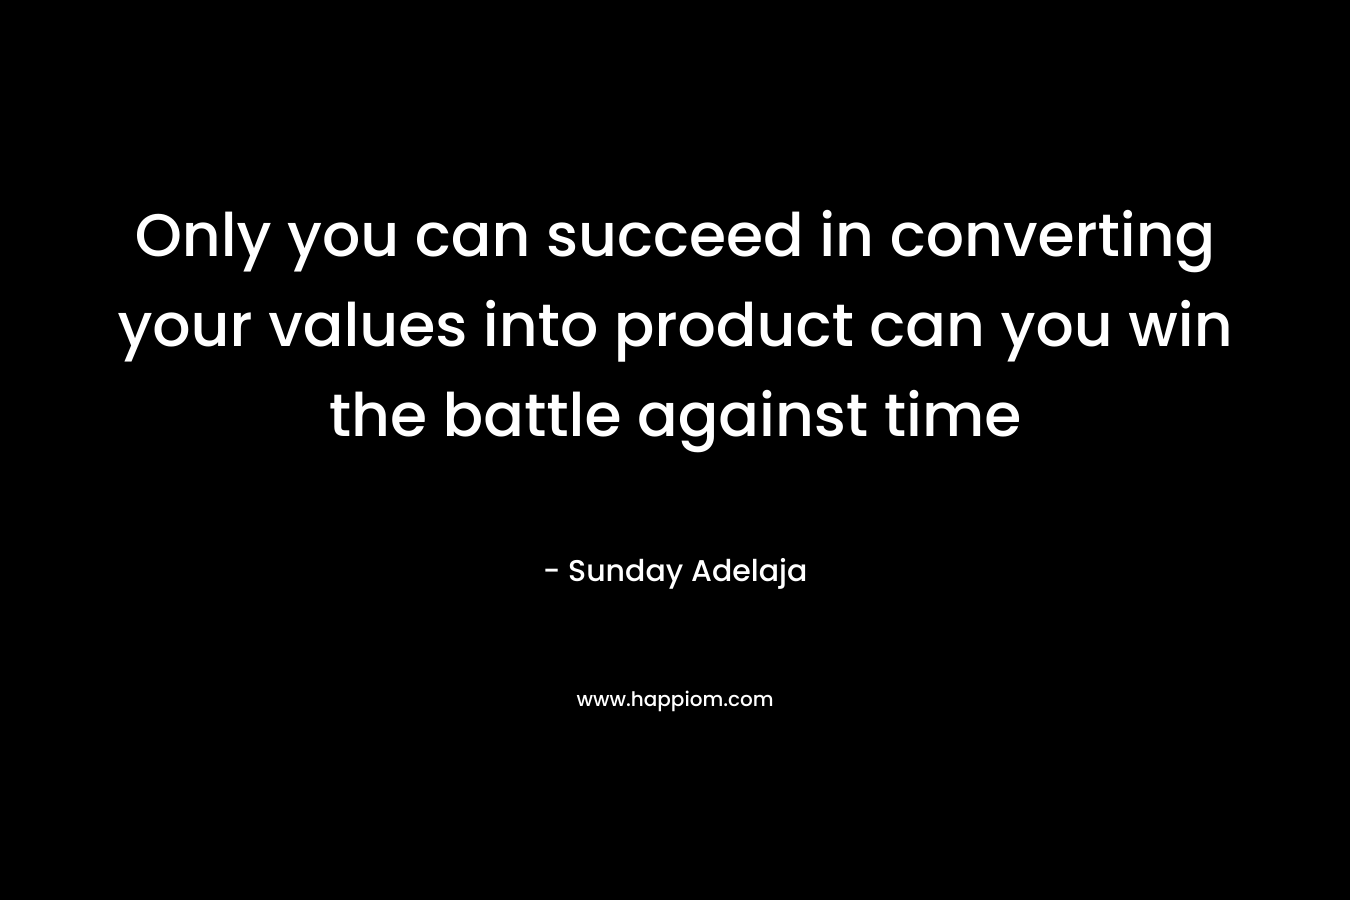 Only you can succeed in converting your values into product can you win the battle against time